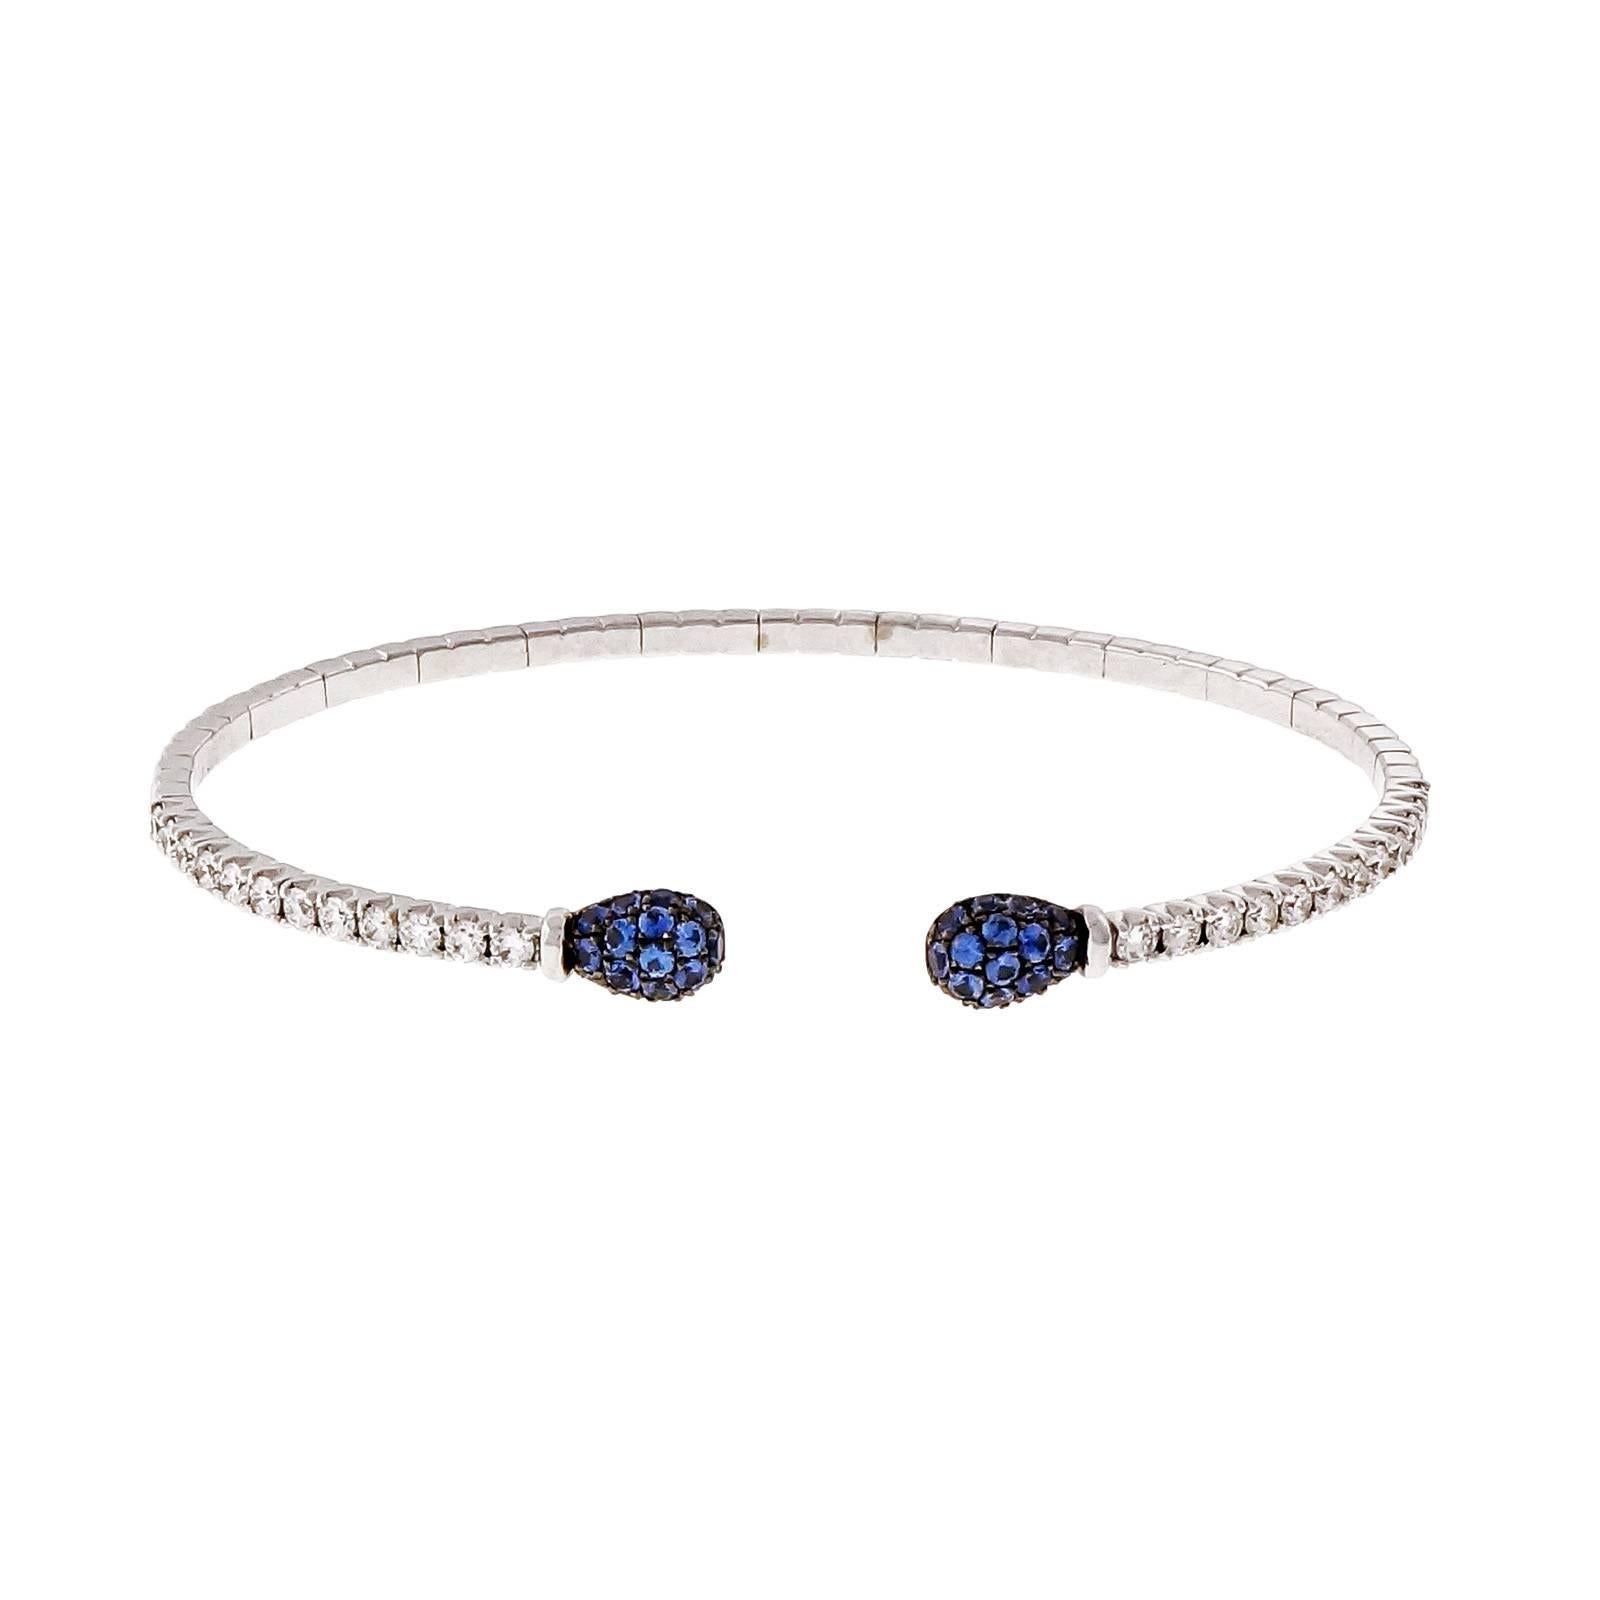 Designer Spark 18k white gold cuff bangle bracelet with blue Sapphires and fine white diamonds.

34 round sapphires, approx. total weight .96cts
24 round diamonds approx. total weight .50cts
18k white gold
Tested and stamped: 18k
Hallmark: